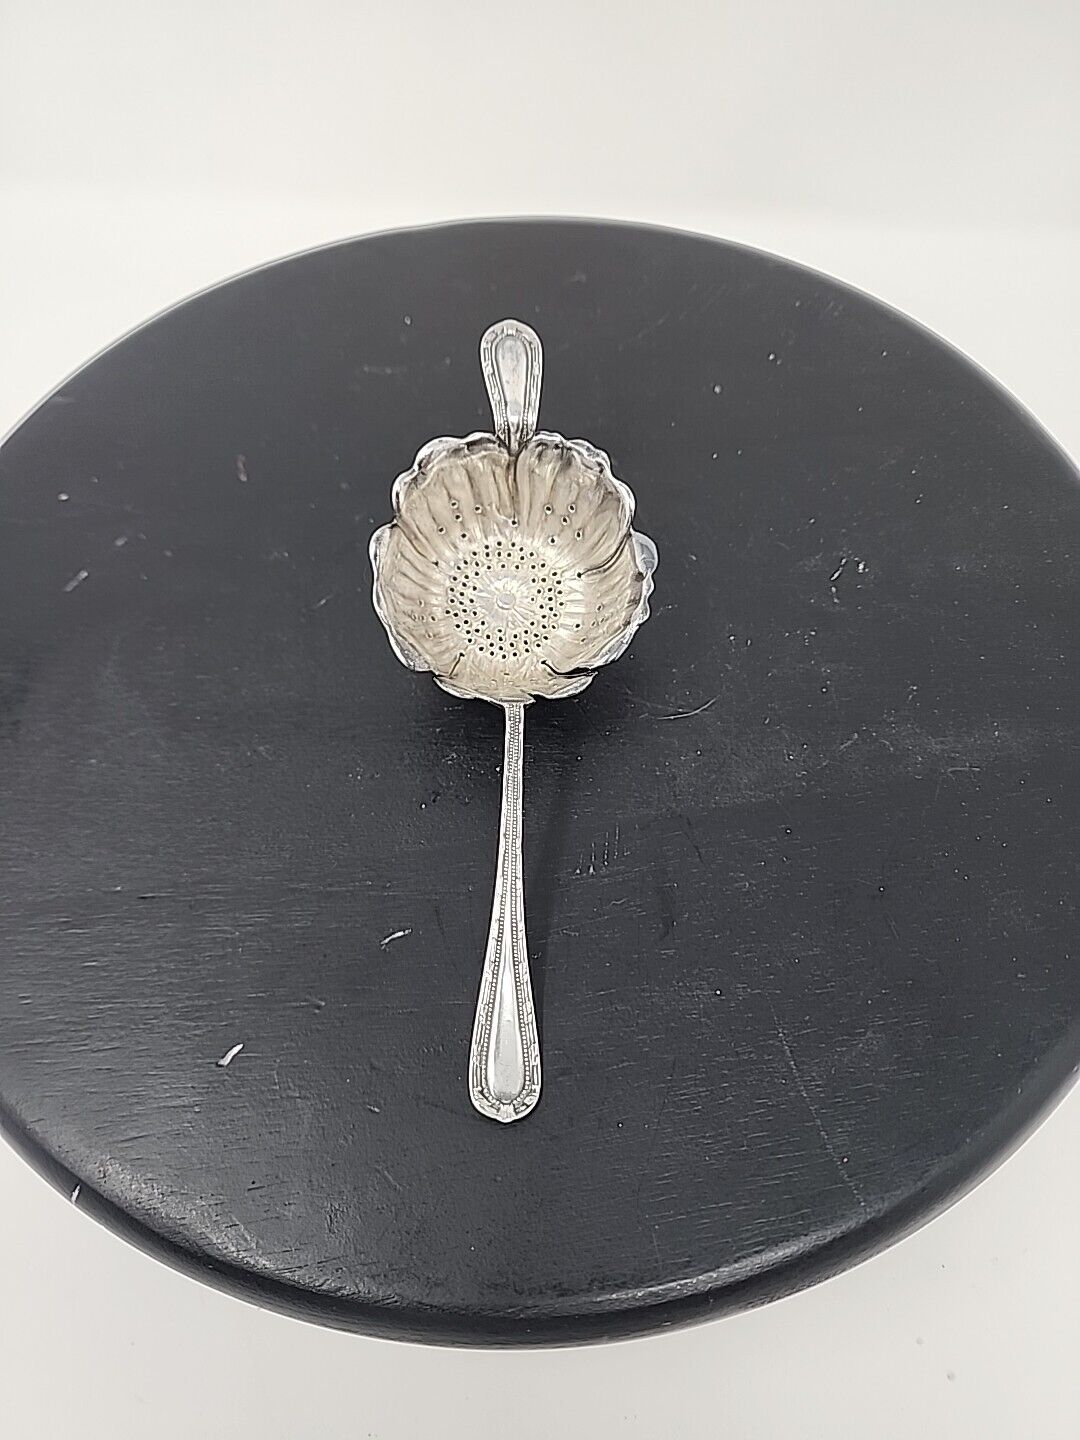 Antique Sterling Silver Carlton House Tea Strainer by Gorham Silver Co. 